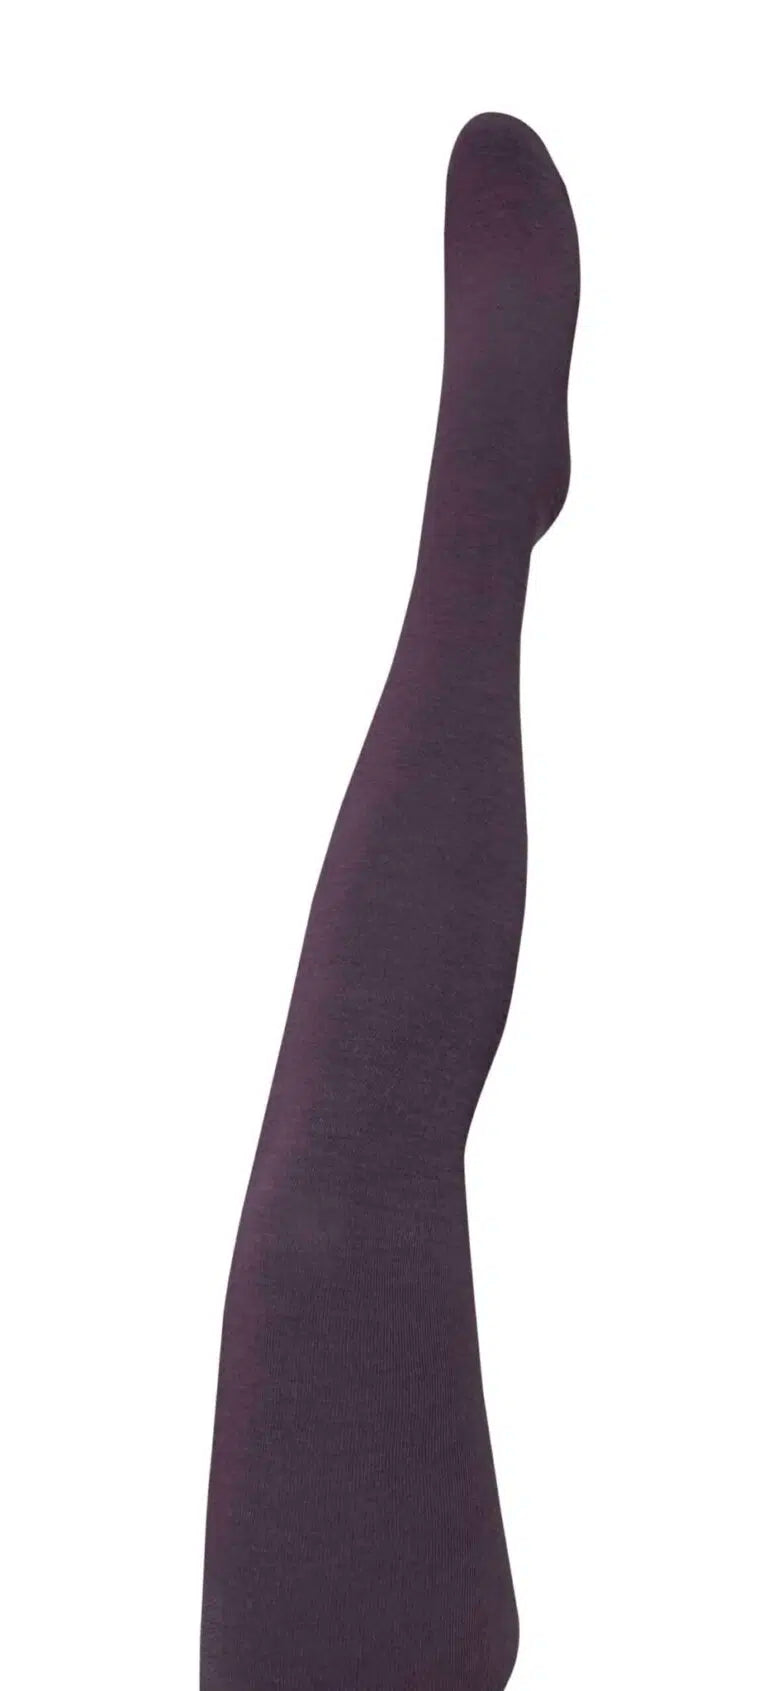 Tightology - Luxe Merino Wool Tights - Mulberry